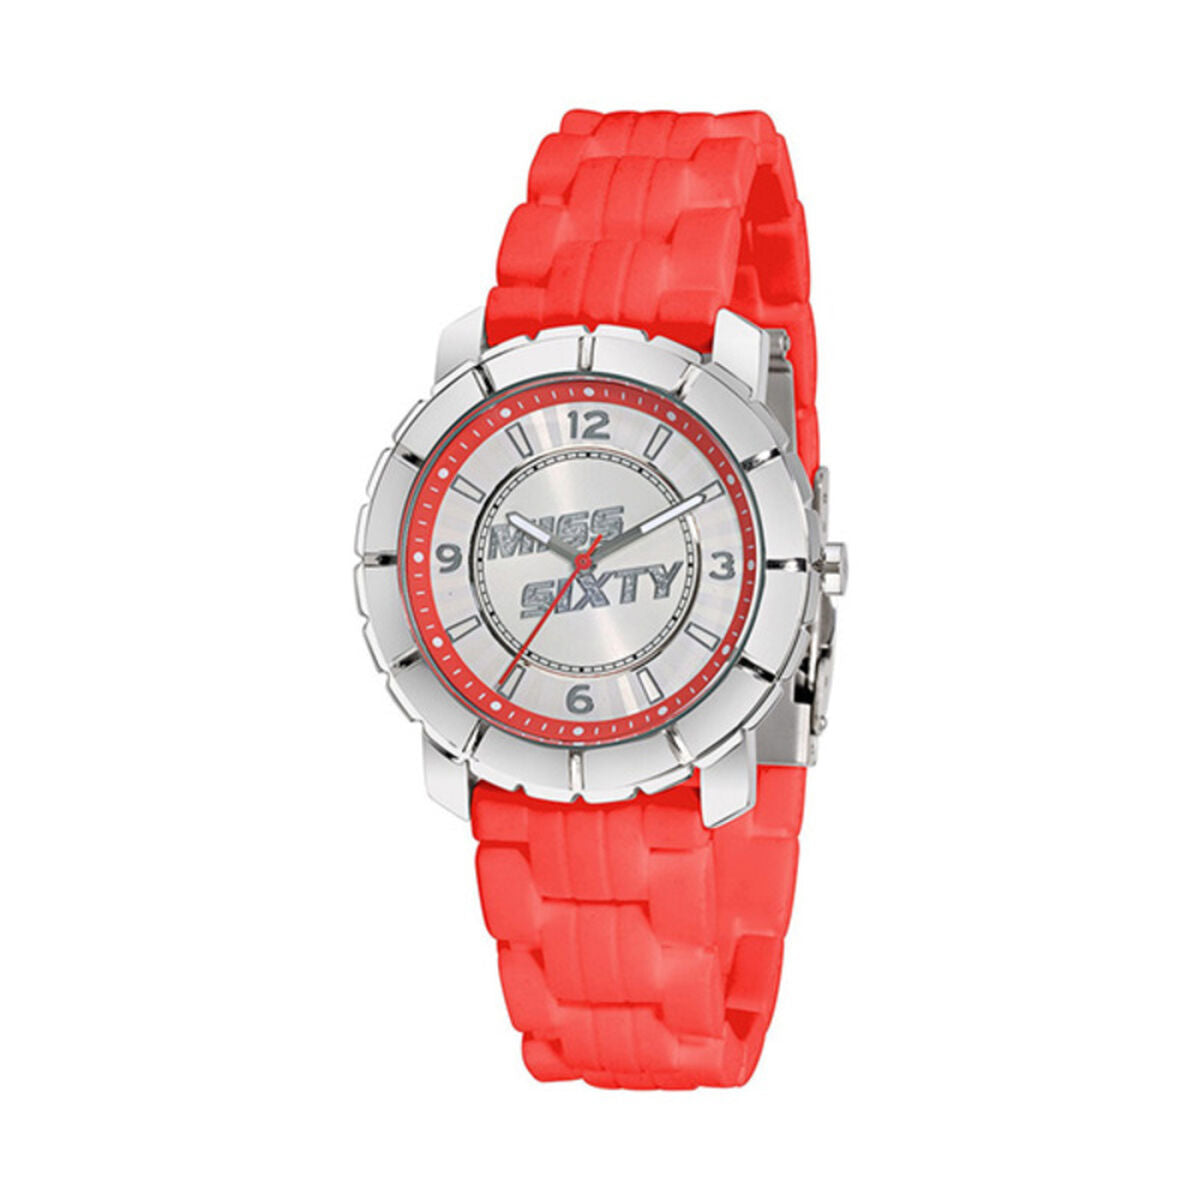 Ladies' Watch Miss Sixty SIJ003 (Ø 40 mm), Miss Sixty, Watches, Women, ladies-watch-miss-sixty-sij003-o-40-mm, : Quartz Movement, :Red, :Silver, Brand_Miss Sixty, category-reference-2570, category-reference-2635, category-reference-2995, category-reference-t-19667, category-reference-t-19725, Condition_NEW, fashion, gifts for women, original gifts, Price_50 - 100, RiotNook